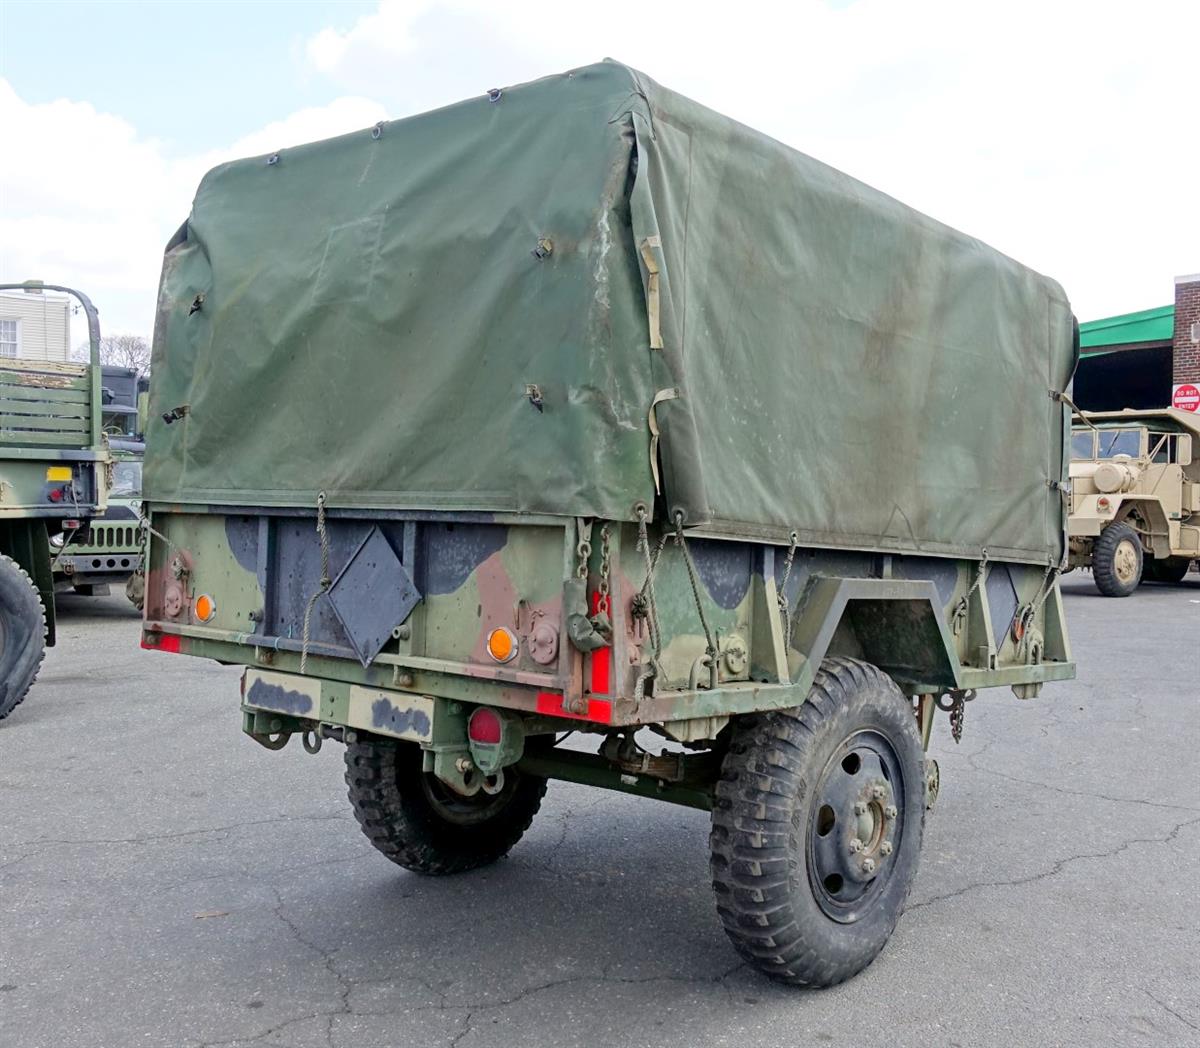 TR-253 | TR-253 M105A2 2 Wheel 1 12 Ton Cargo Trailer with Cargo Cover USED (13).JPG